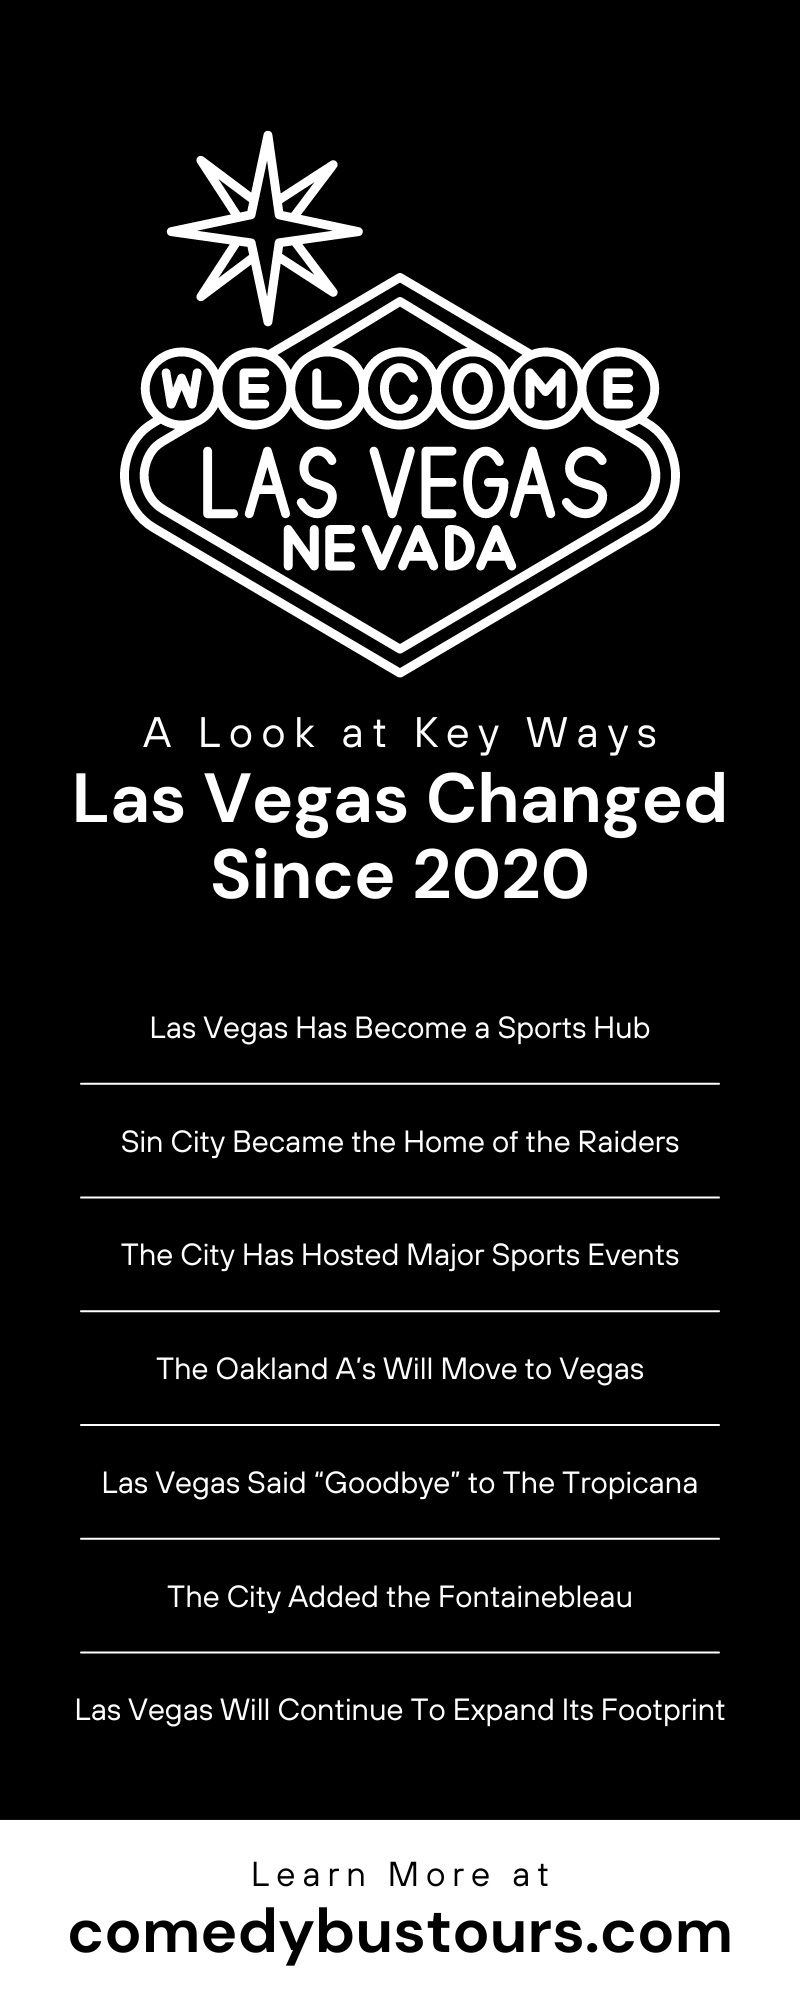 A Look at Key Ways Las Vegas Changed Since 2020